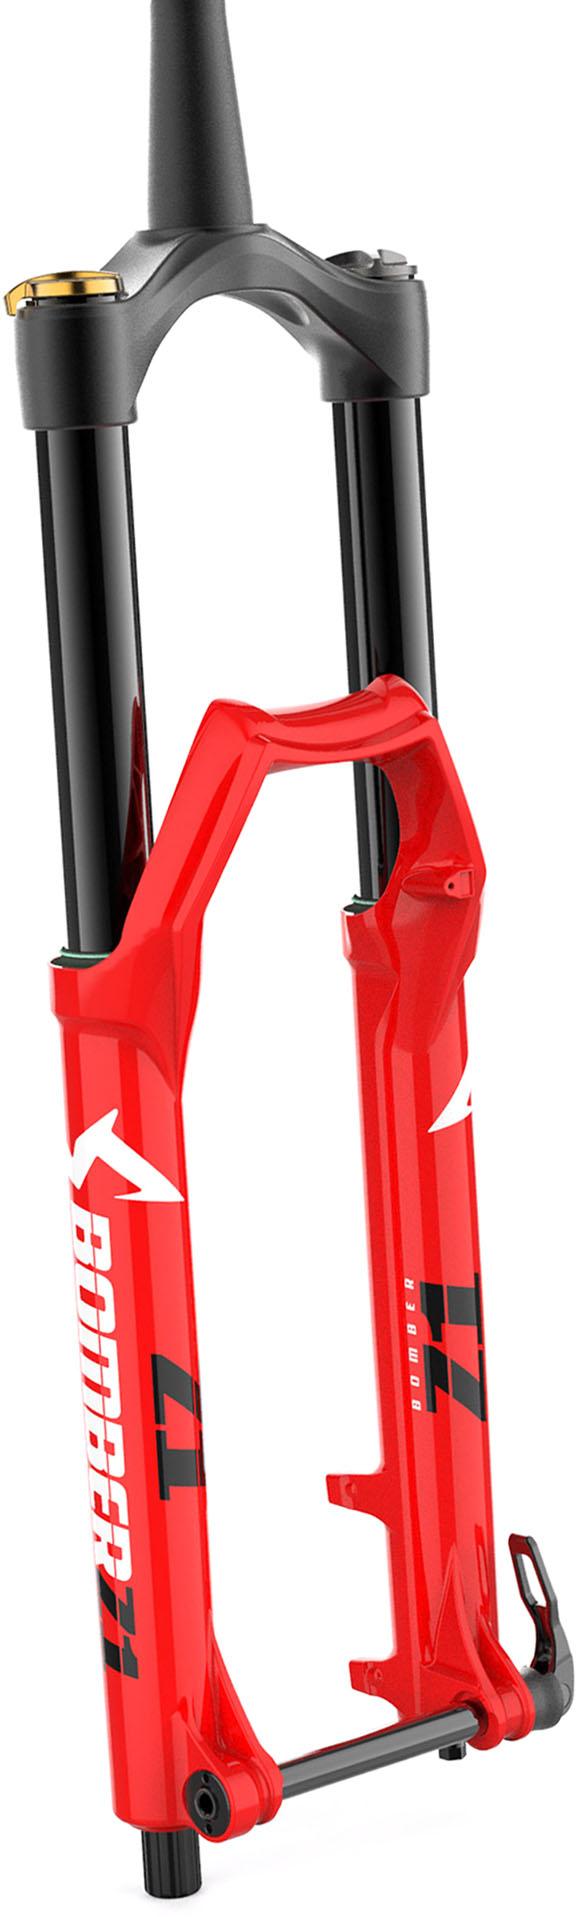 Marzocchi Bomber Z2 Boost Fork - Gloss Red